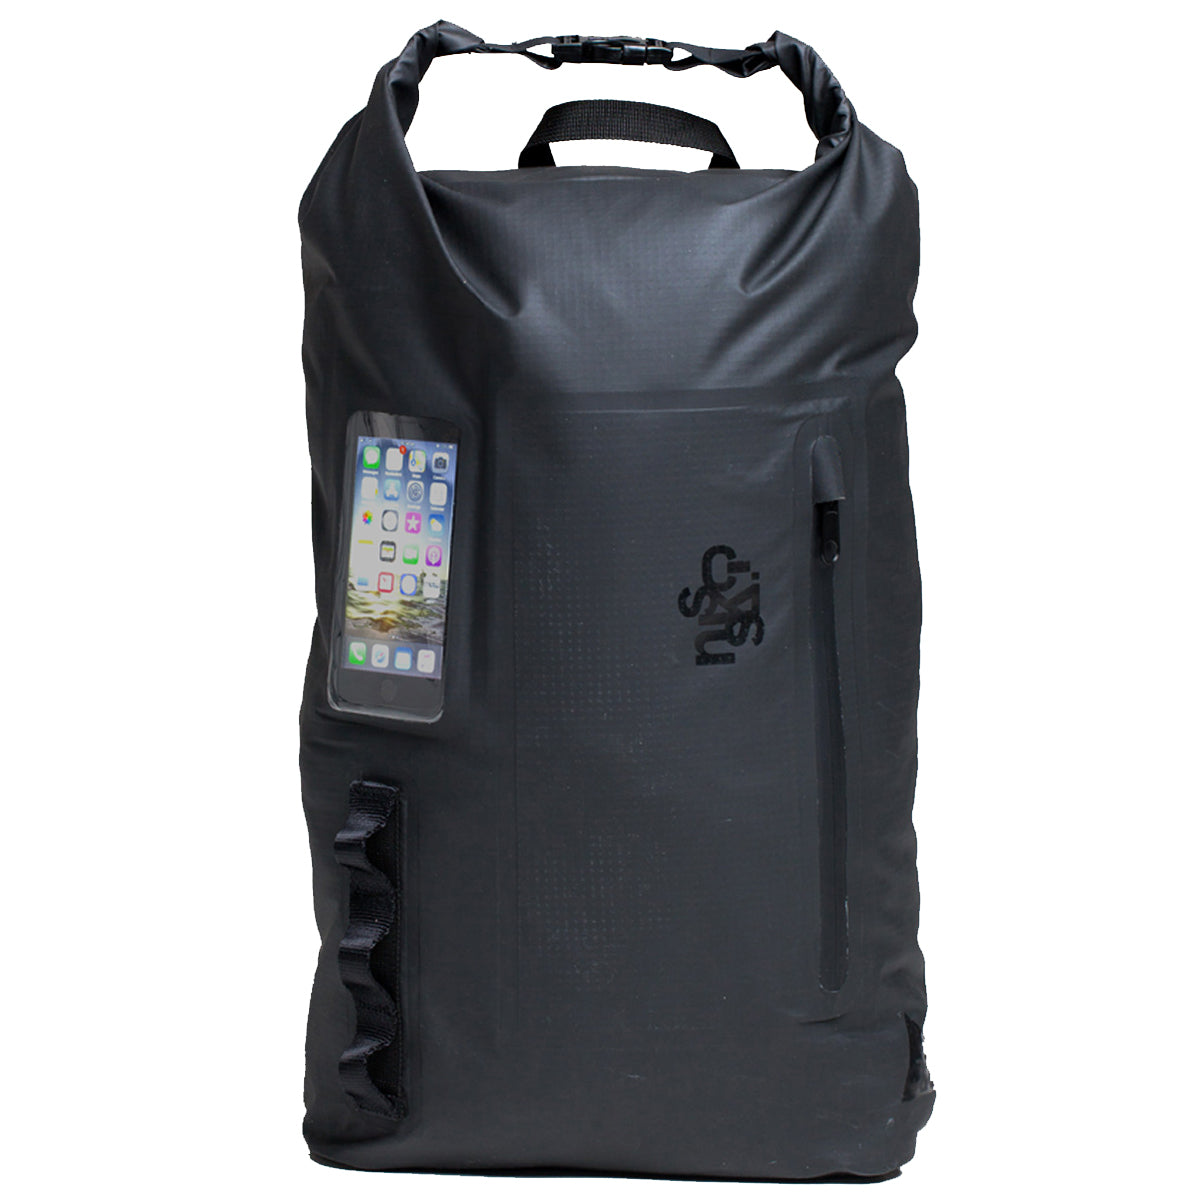 C-Skins Session 22L Dry Bag Backpack (Phone not included!)